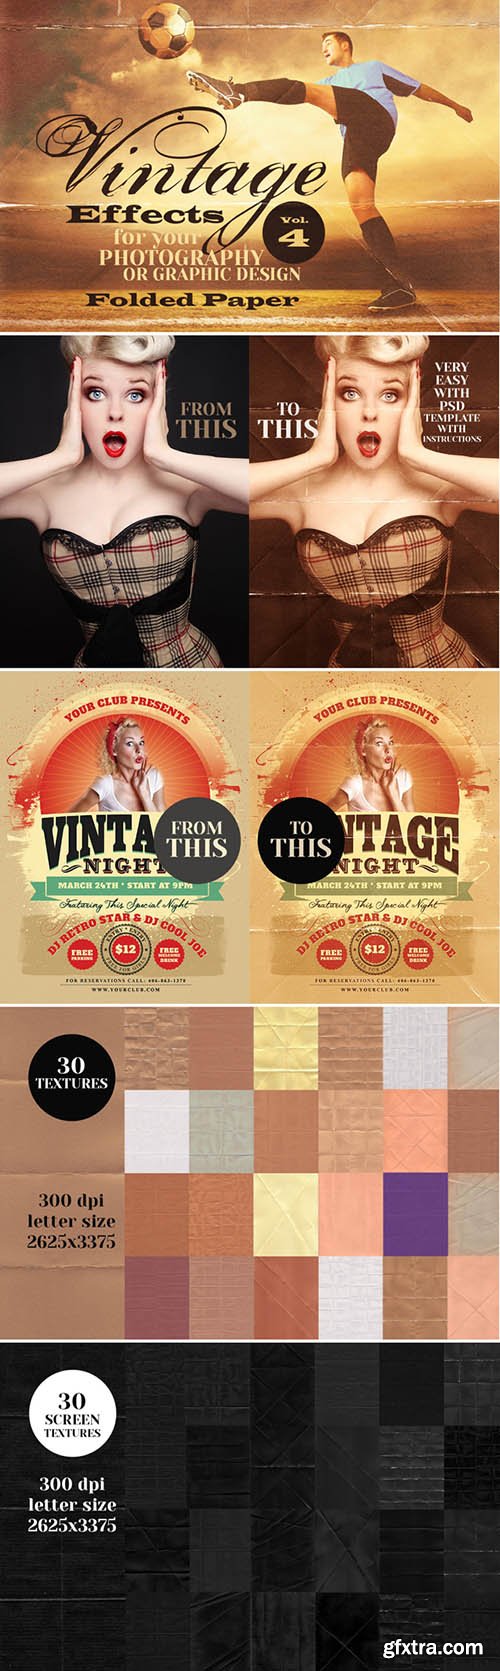 Vintage Effects - Photography or Graphic Design